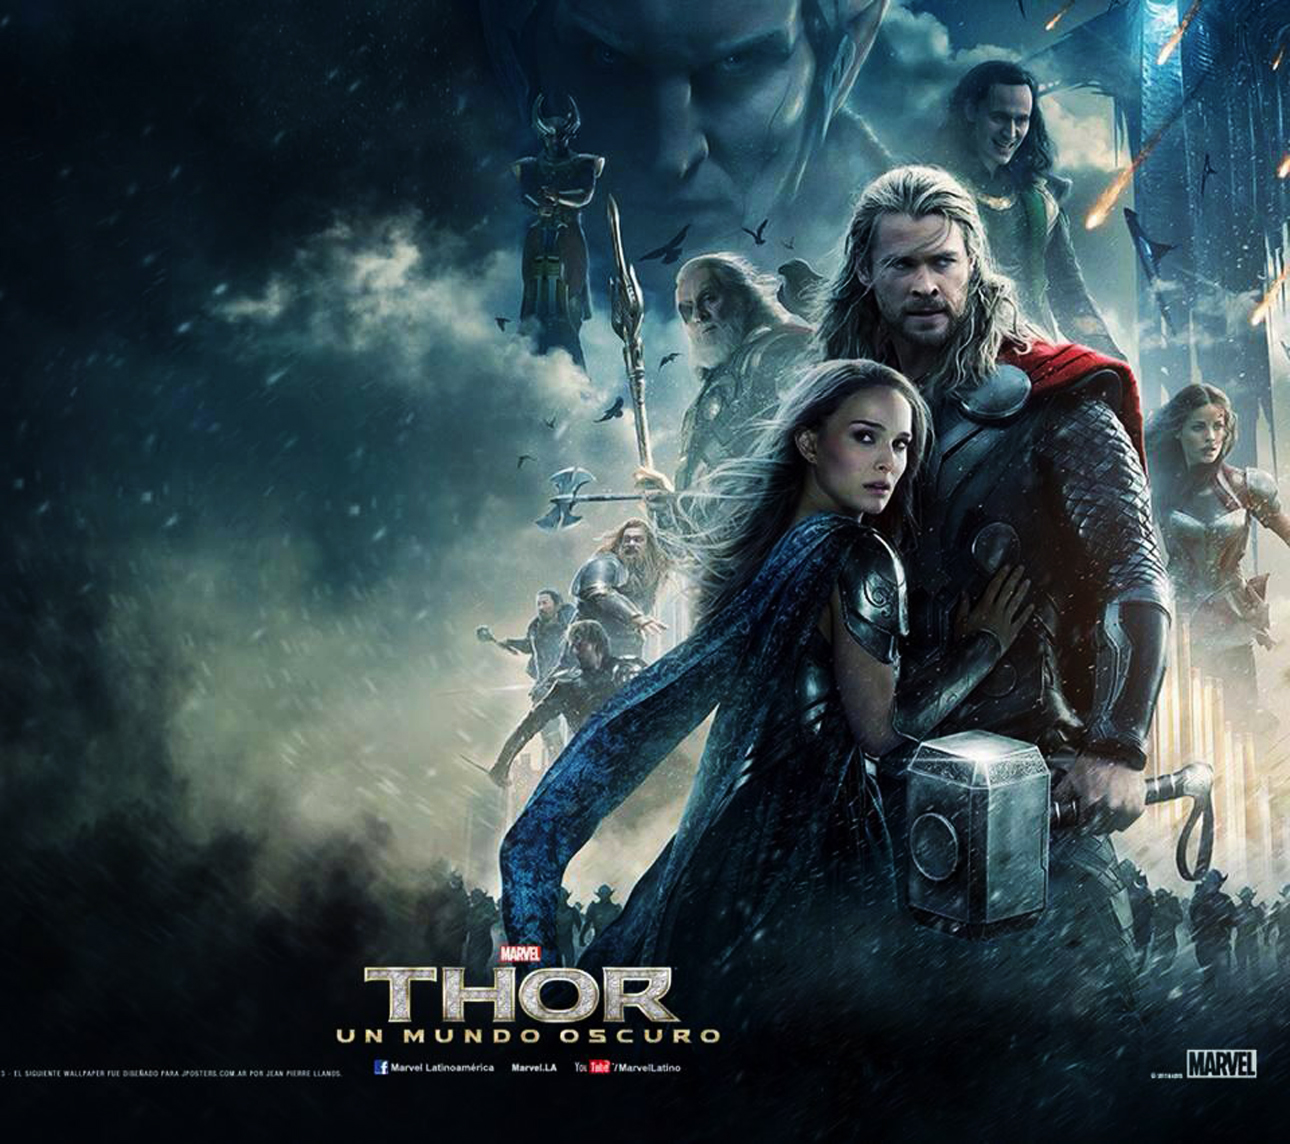 Thor The Dark World HD Wallpaper And Movie Poster